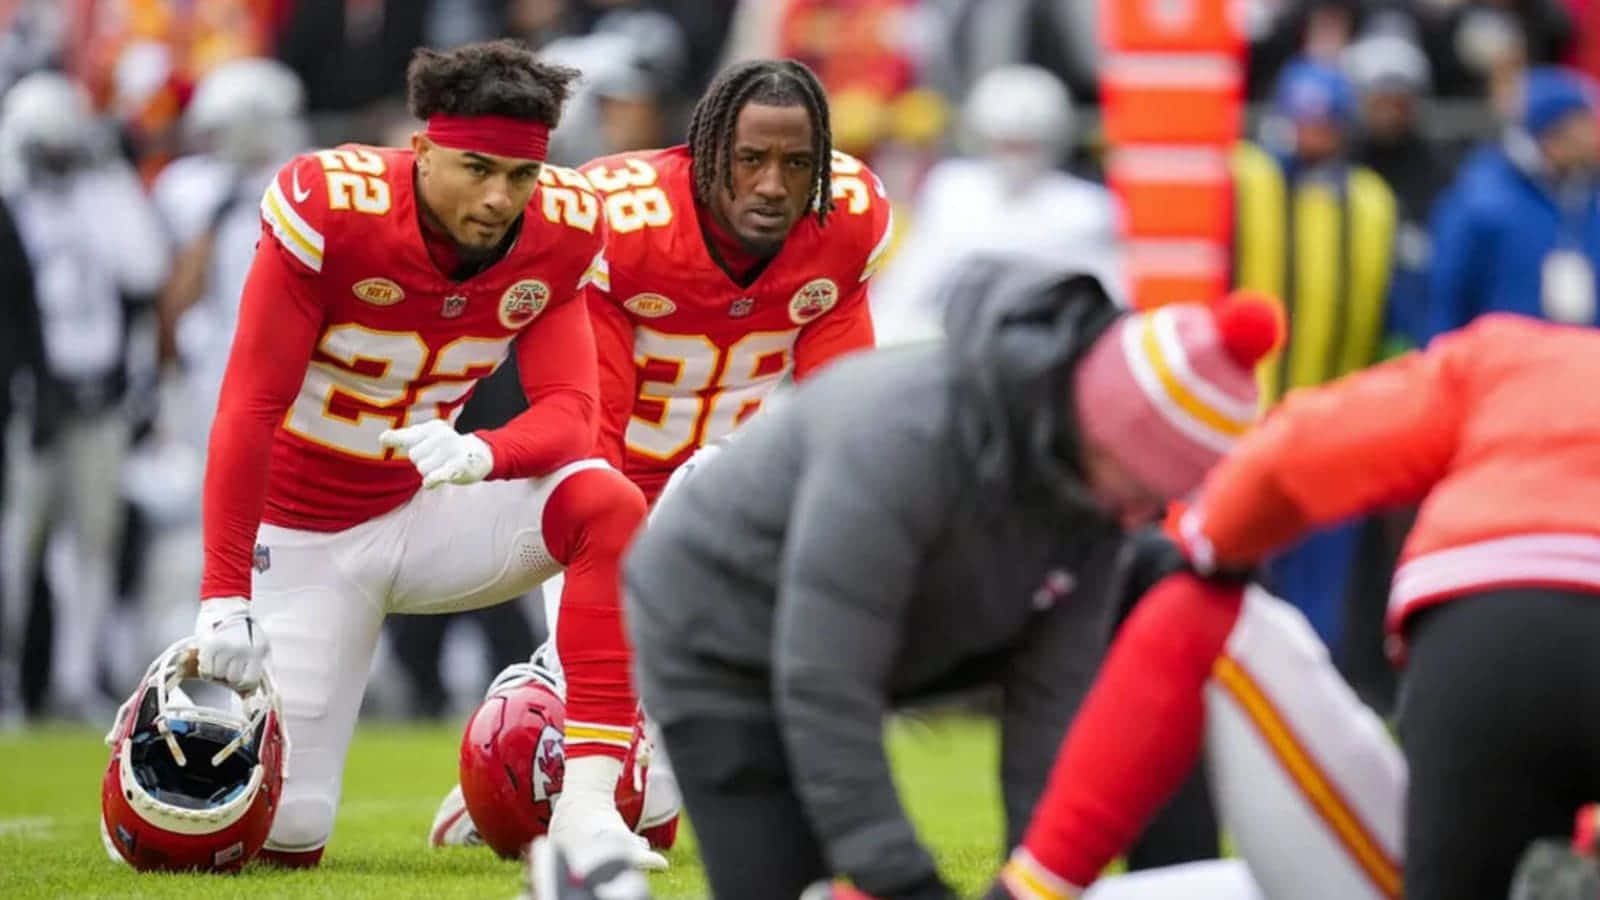 Chiefs Players Sideline Concentration Wallpaper